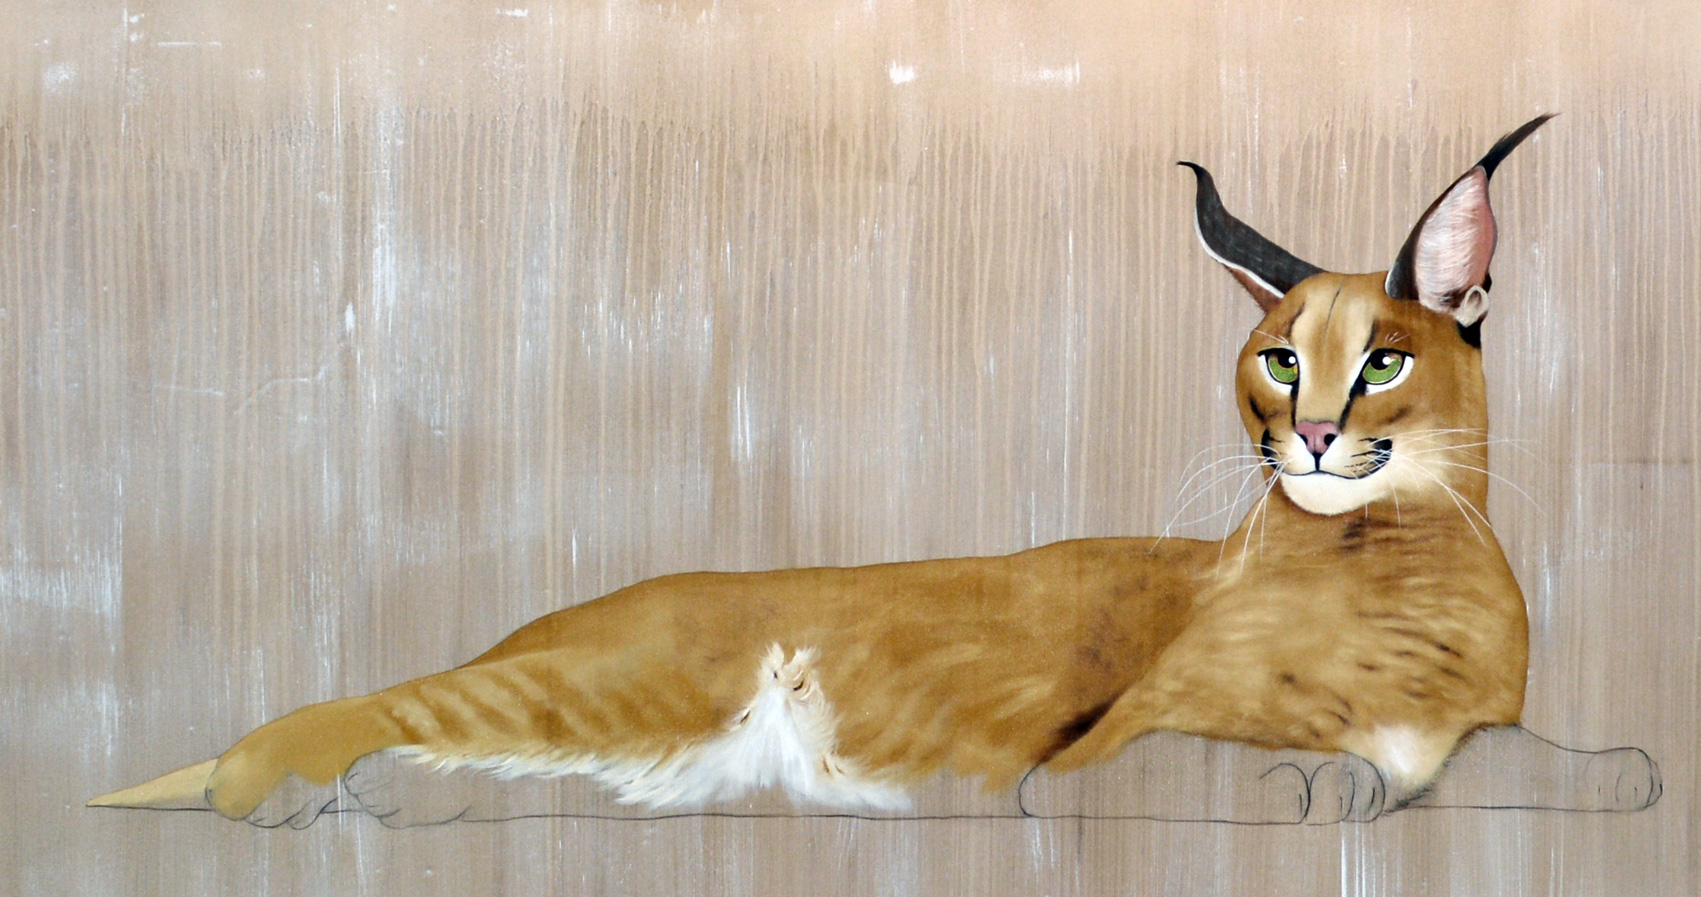 CARACAL caracal Thierry Bisch Contemporary painter animals painting art decoration nature biodiversity conservation